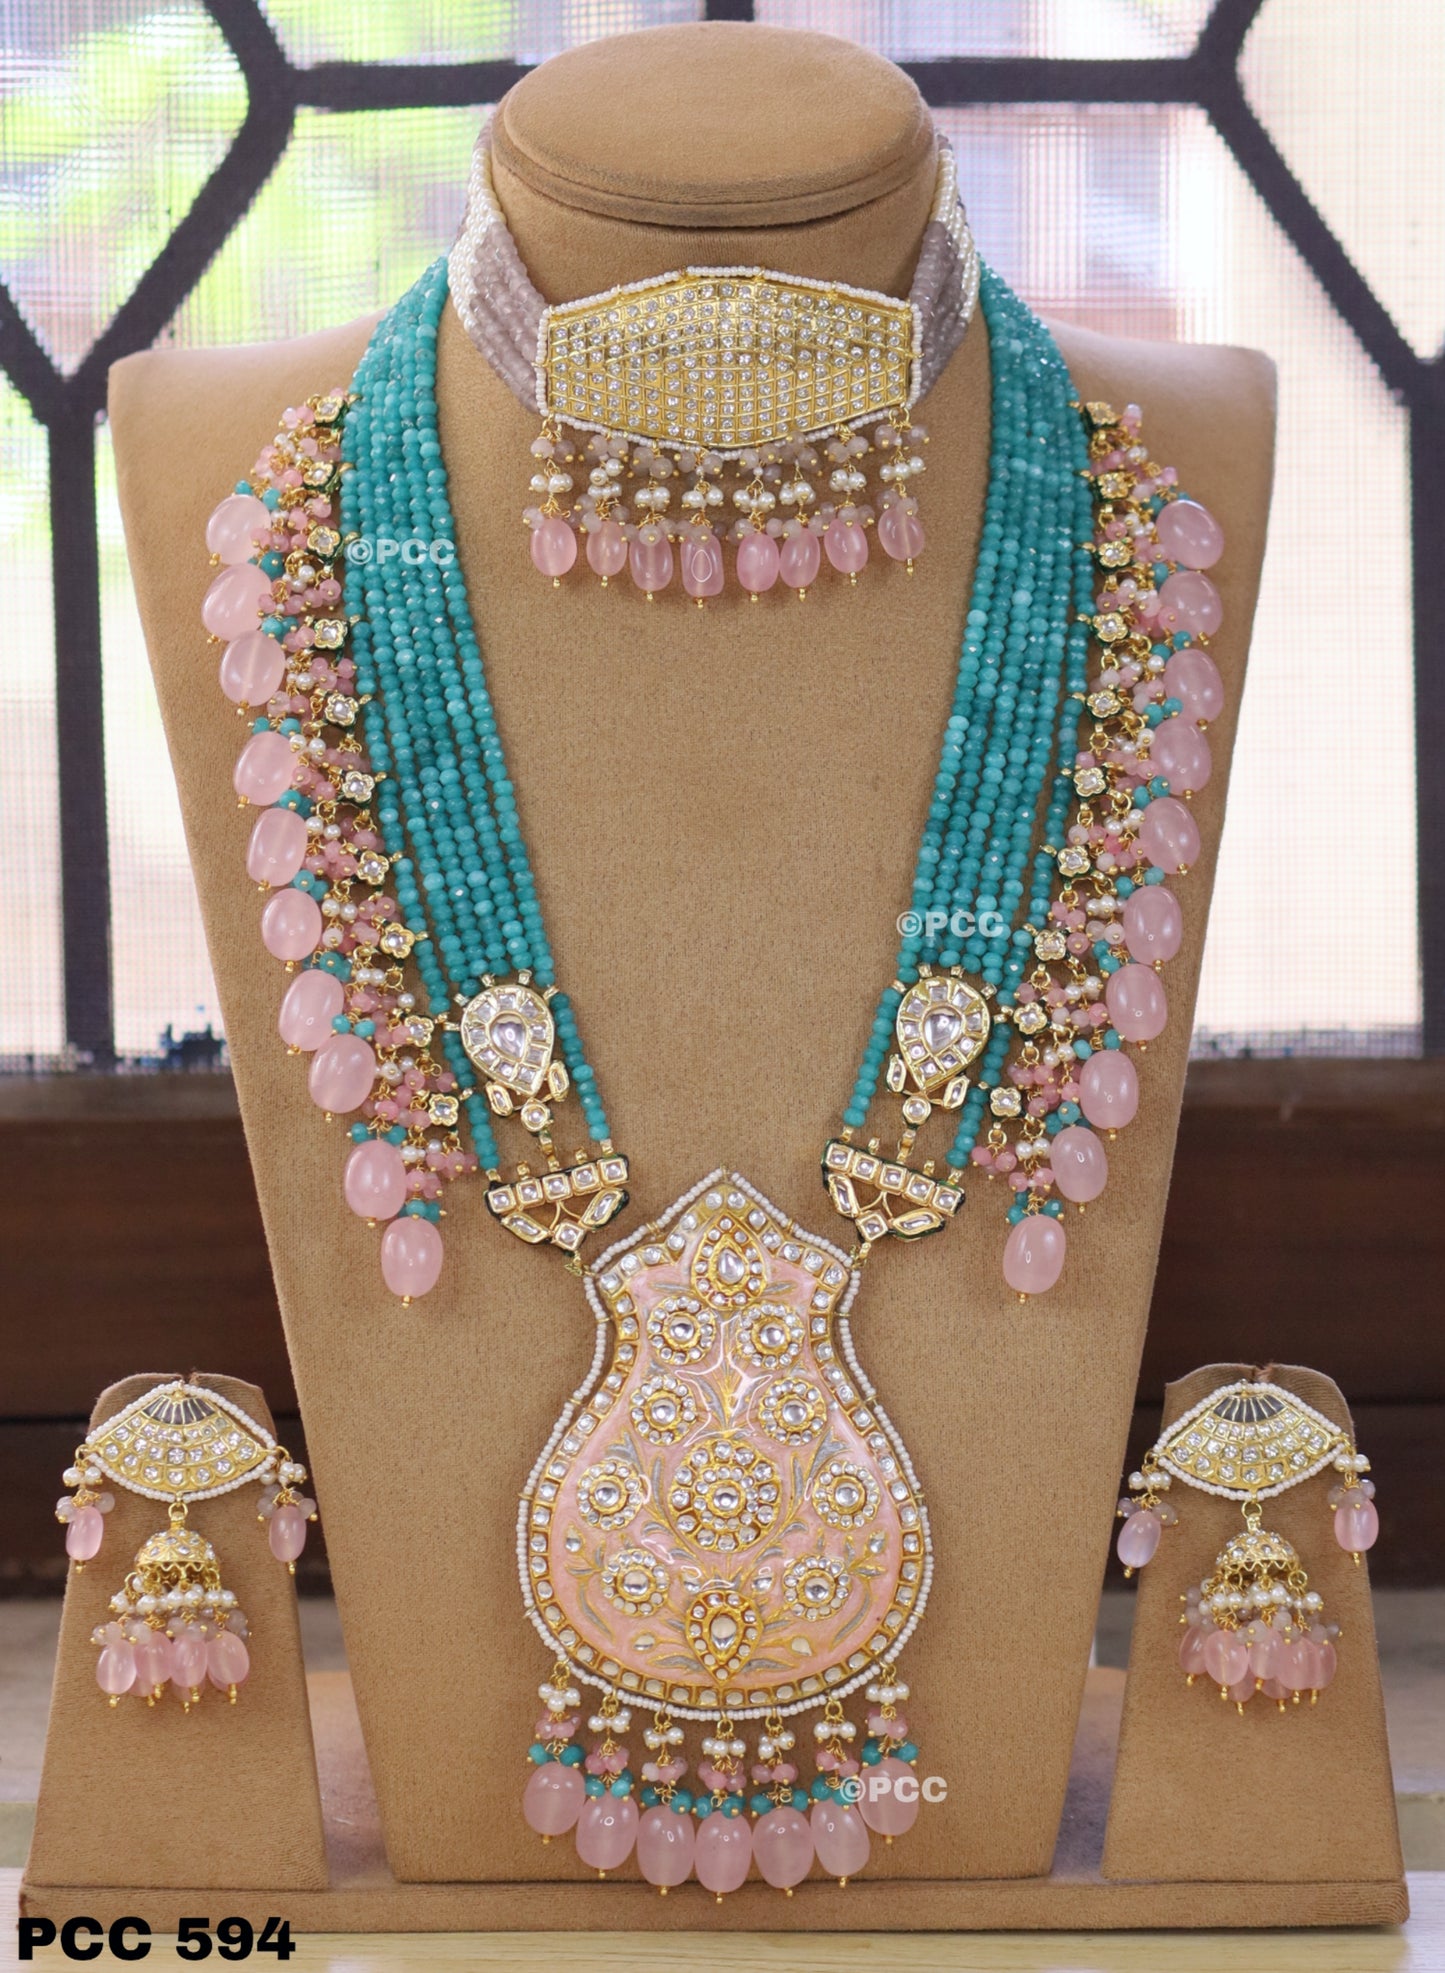 Fashionable Ethnic Choker Necklace set with Earrings